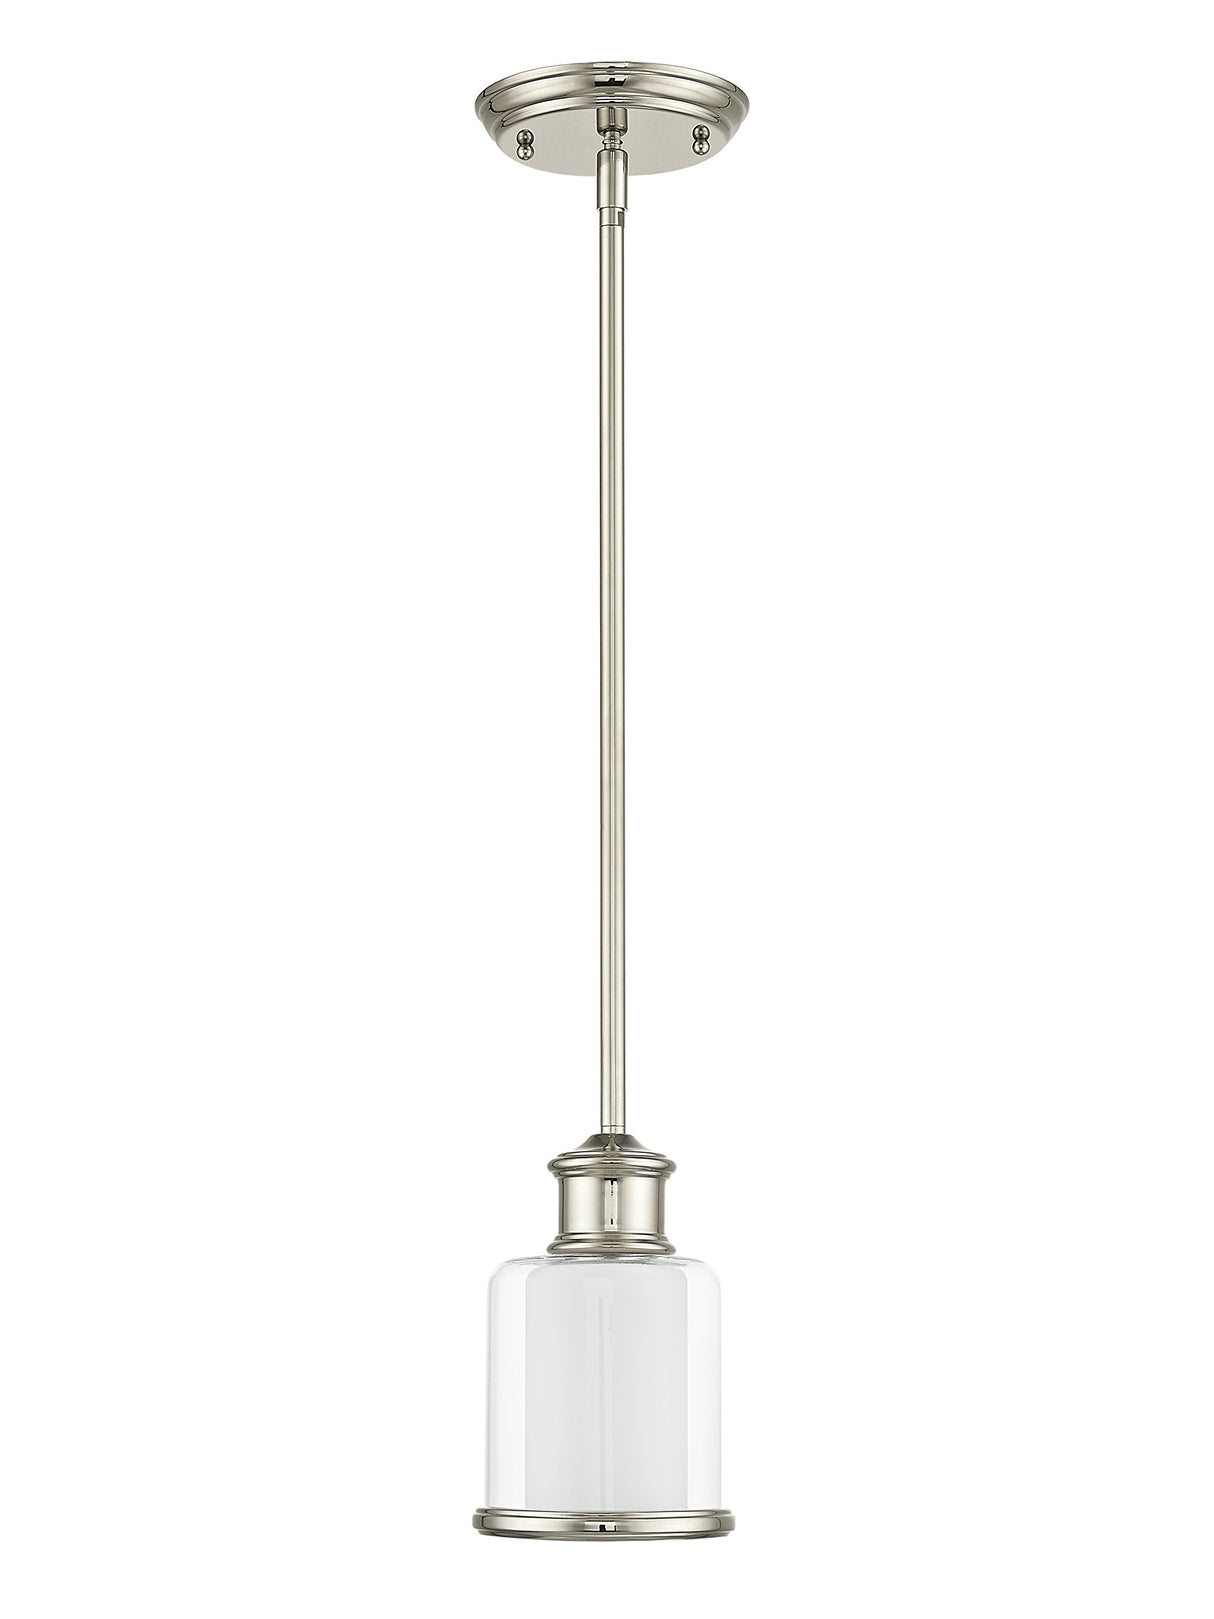 Livex 40210-35 Transitional One Light Mini Pendant from Middlebush Collection in Polished Nickel Finish